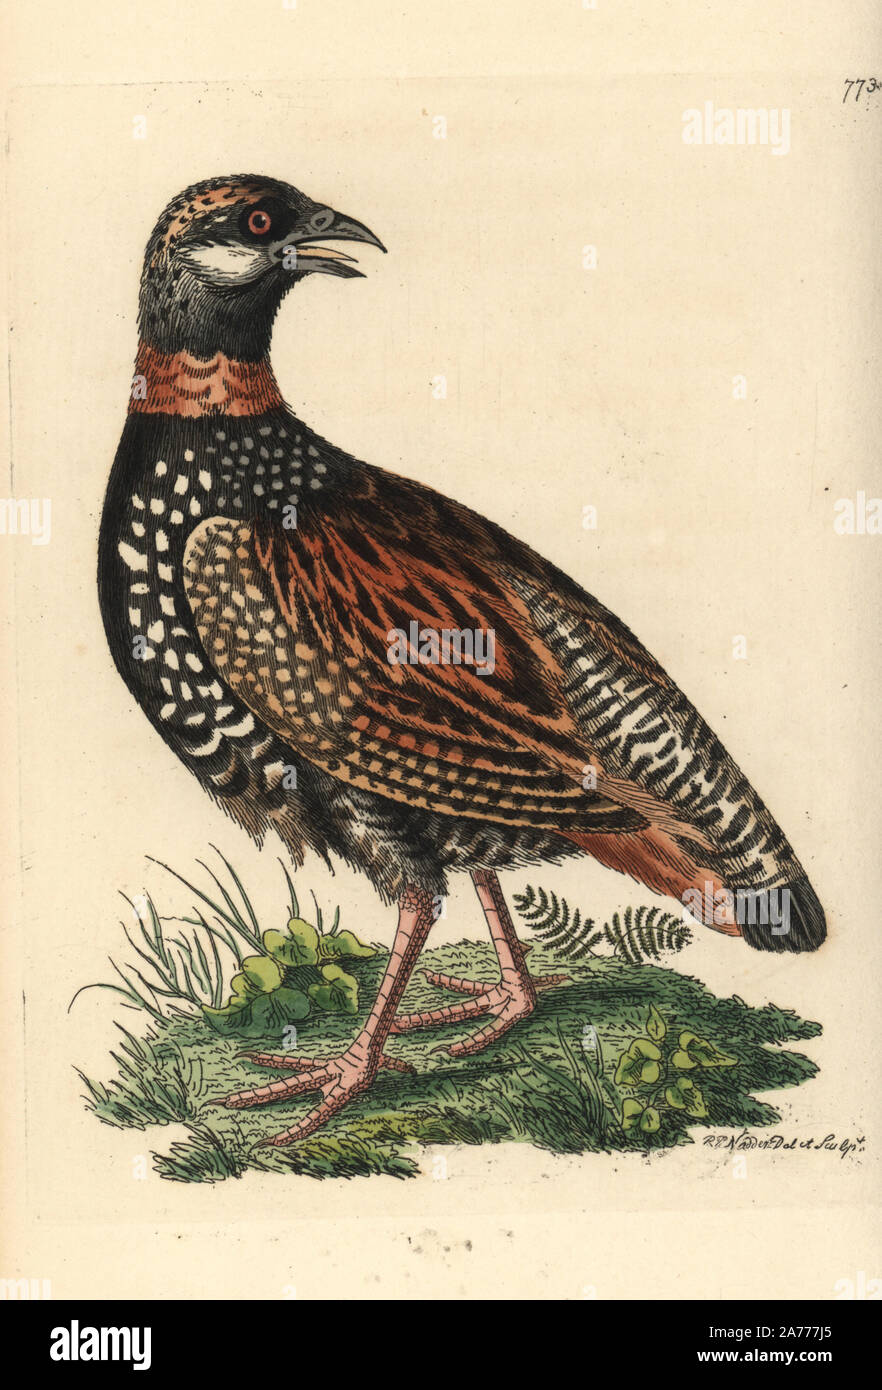 Black francolin, Francolinus francolinus. Illustration drawn and engraved by Richard Polydore Nodder. Handcoloured copperplate engraving from George Shaw and Frederick Nodder's 'The Naturalist's Miscellany,' London, 1805. Stock Photo